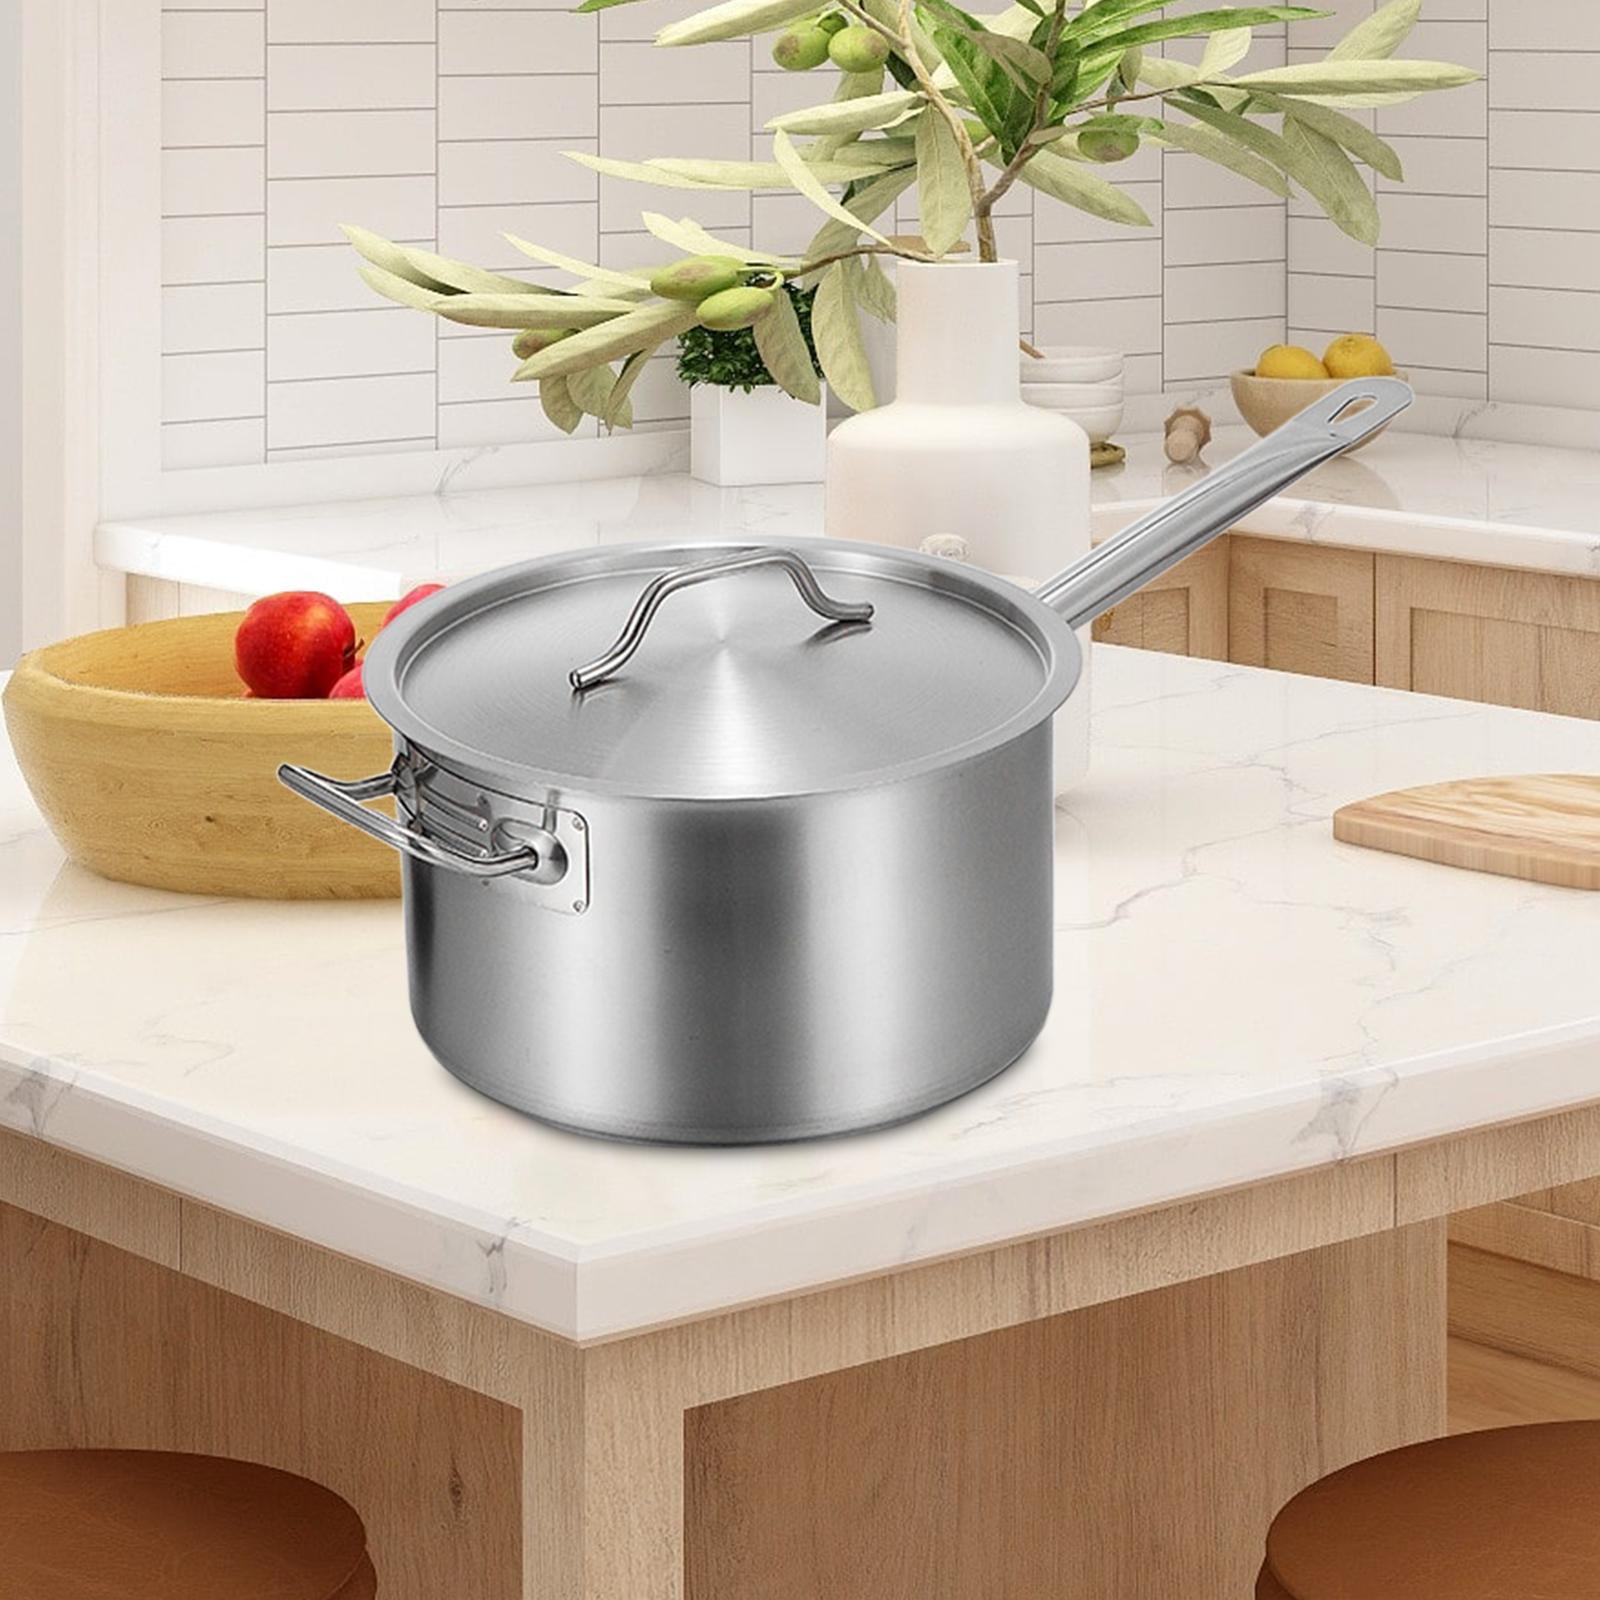 Stainless Steel Saucepan with Lid, Triple Ply 1.5 Quart Sauce pan with  Cover Induction Cooking Sauce Pot Perfect for Making Sauces, Reheating  Soups